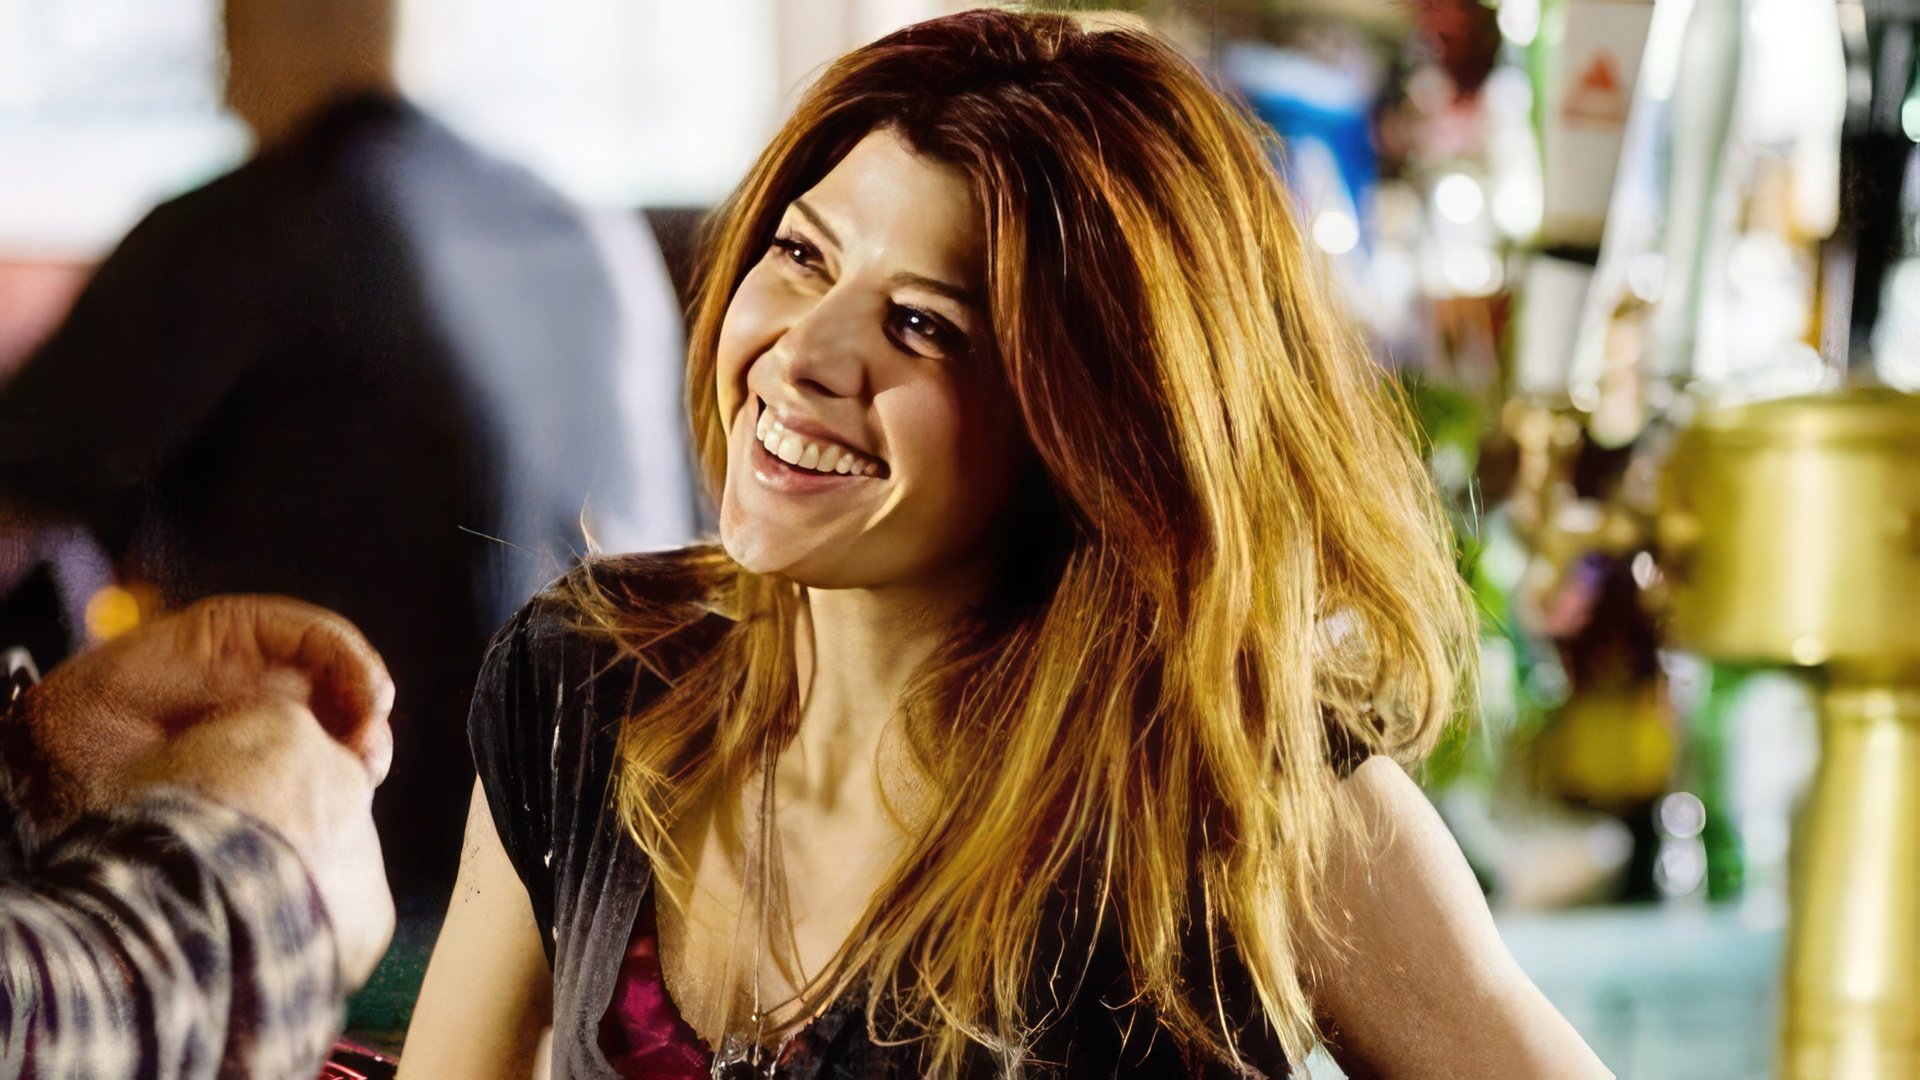 Marisa Tomei manages to look significantly younger than her years